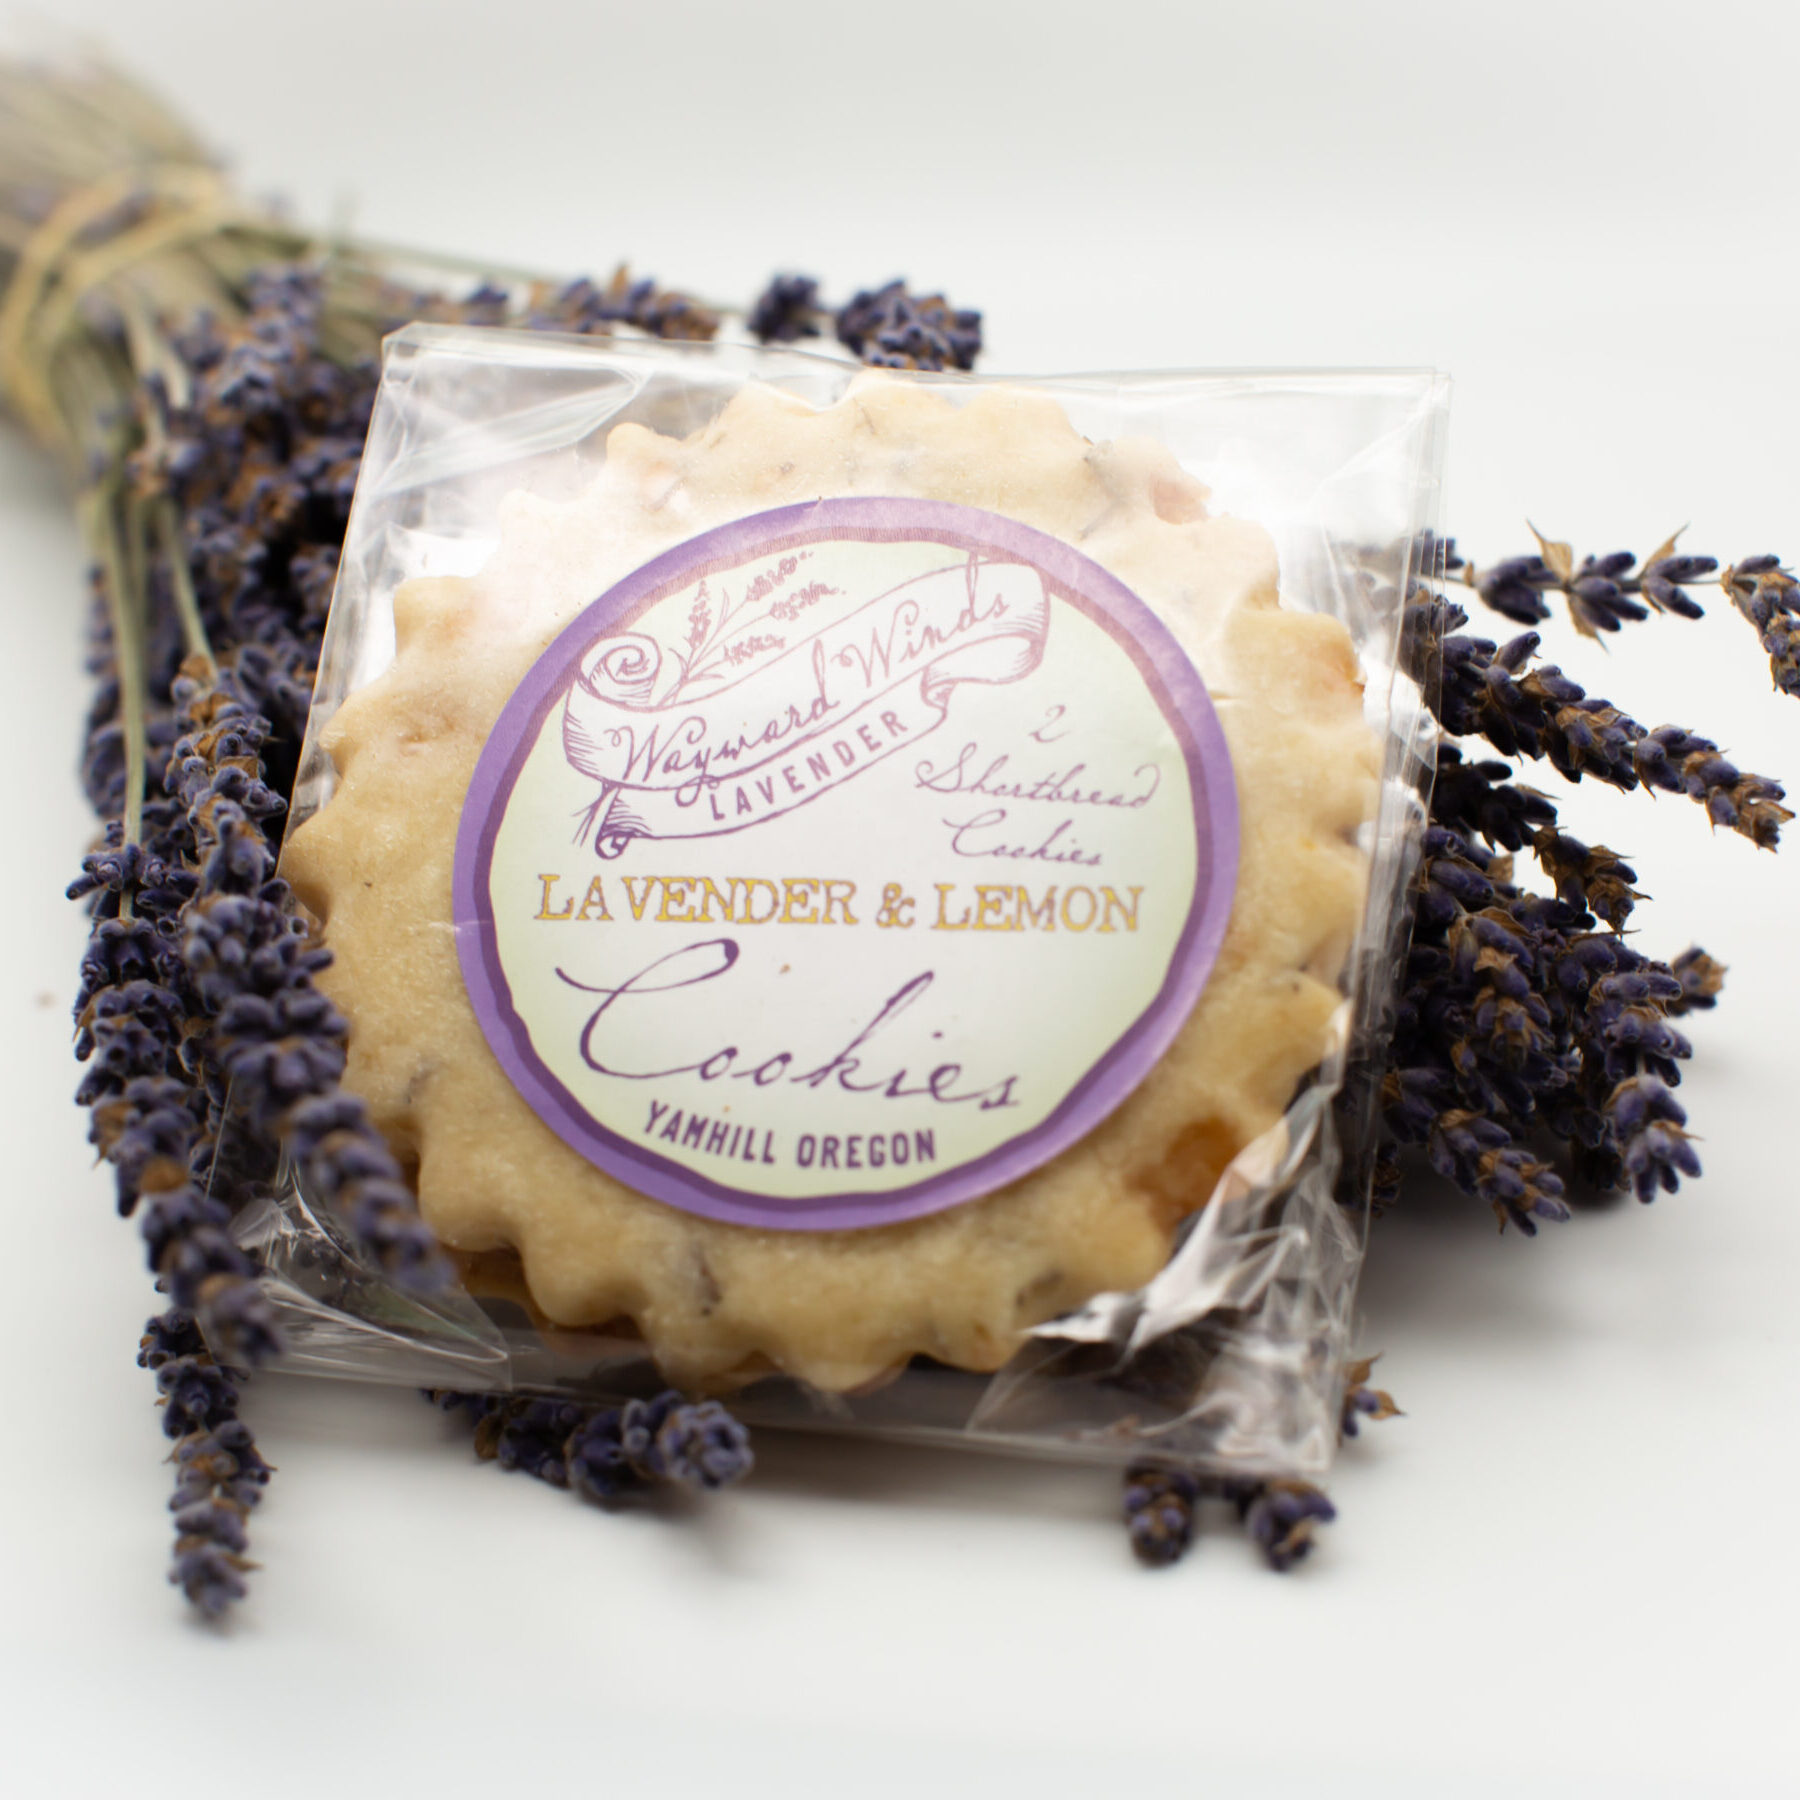 Cookies and care-taking at the lavender shop